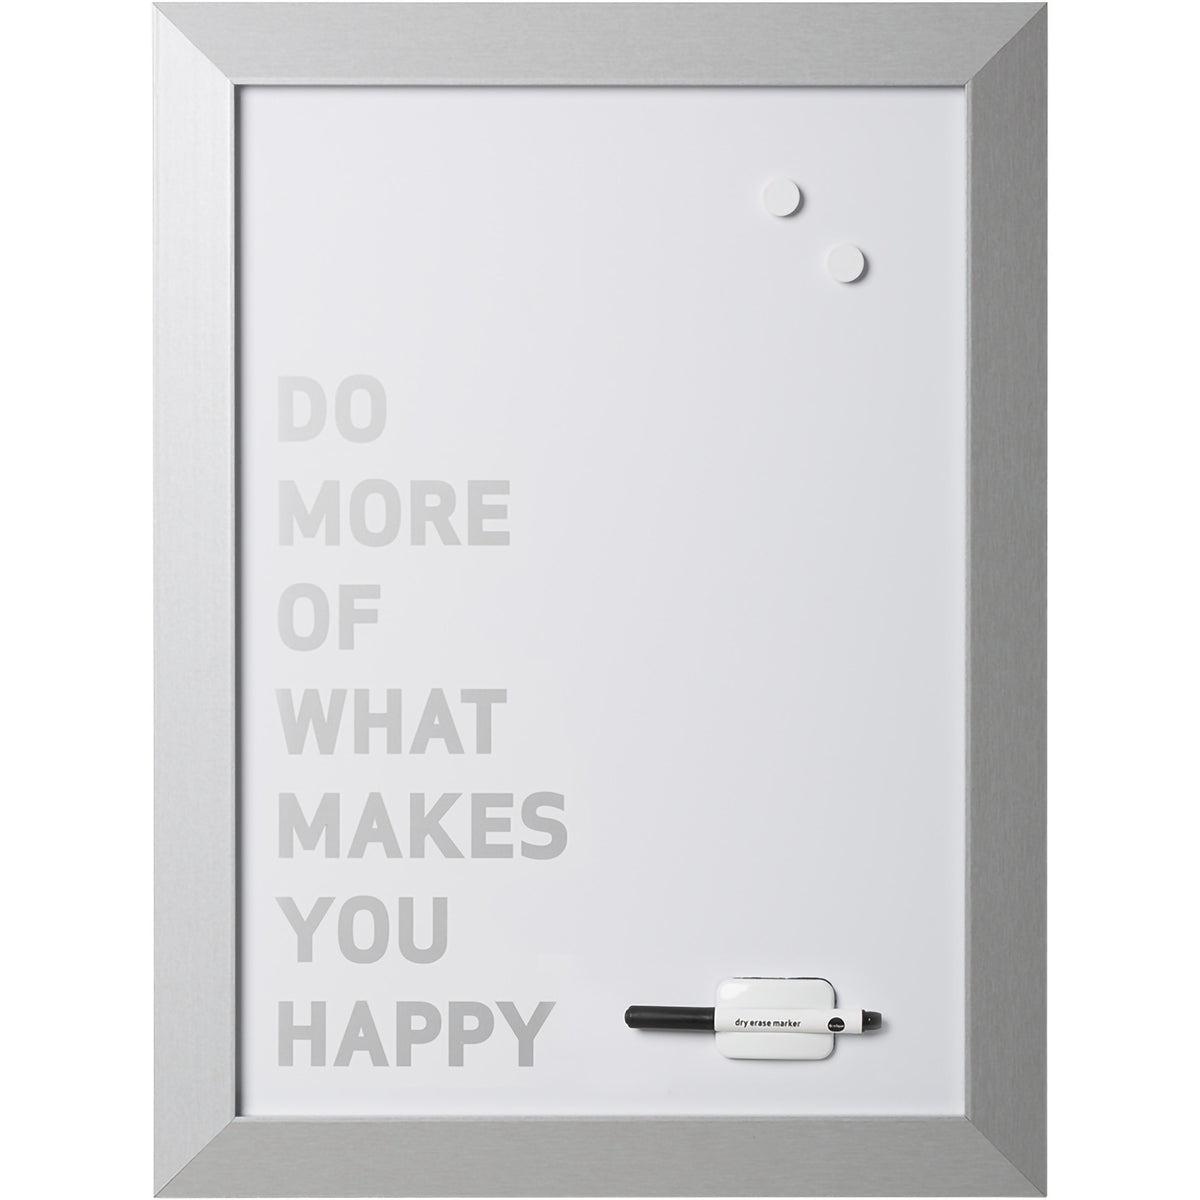 MM04449522 Kamashi "Do More..." Quote Dry Erase Magnetic Personal White Board + Marker, Eraser & 2 Magnets, Home Decor, 24" x 18", Silver Wood Frame by MasterVision